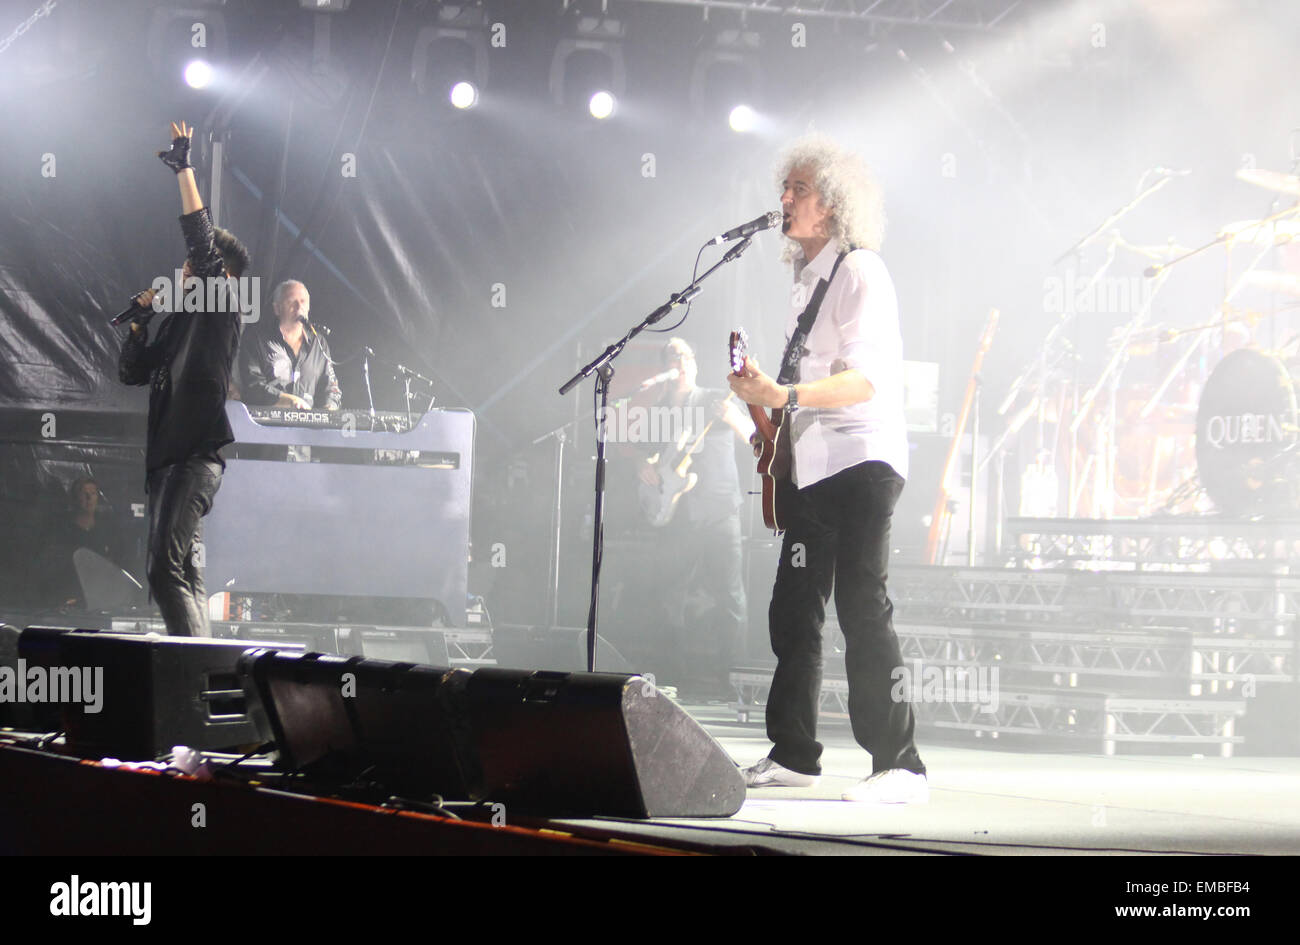 KYIV, UKRAINE - JUNE 30, 2012: Queen with Adam Lambert perform onstage during charity Anti-AIDS concert at the Independence Square on June 30, 2012 in Kyiv, Ukraine Stock Photo